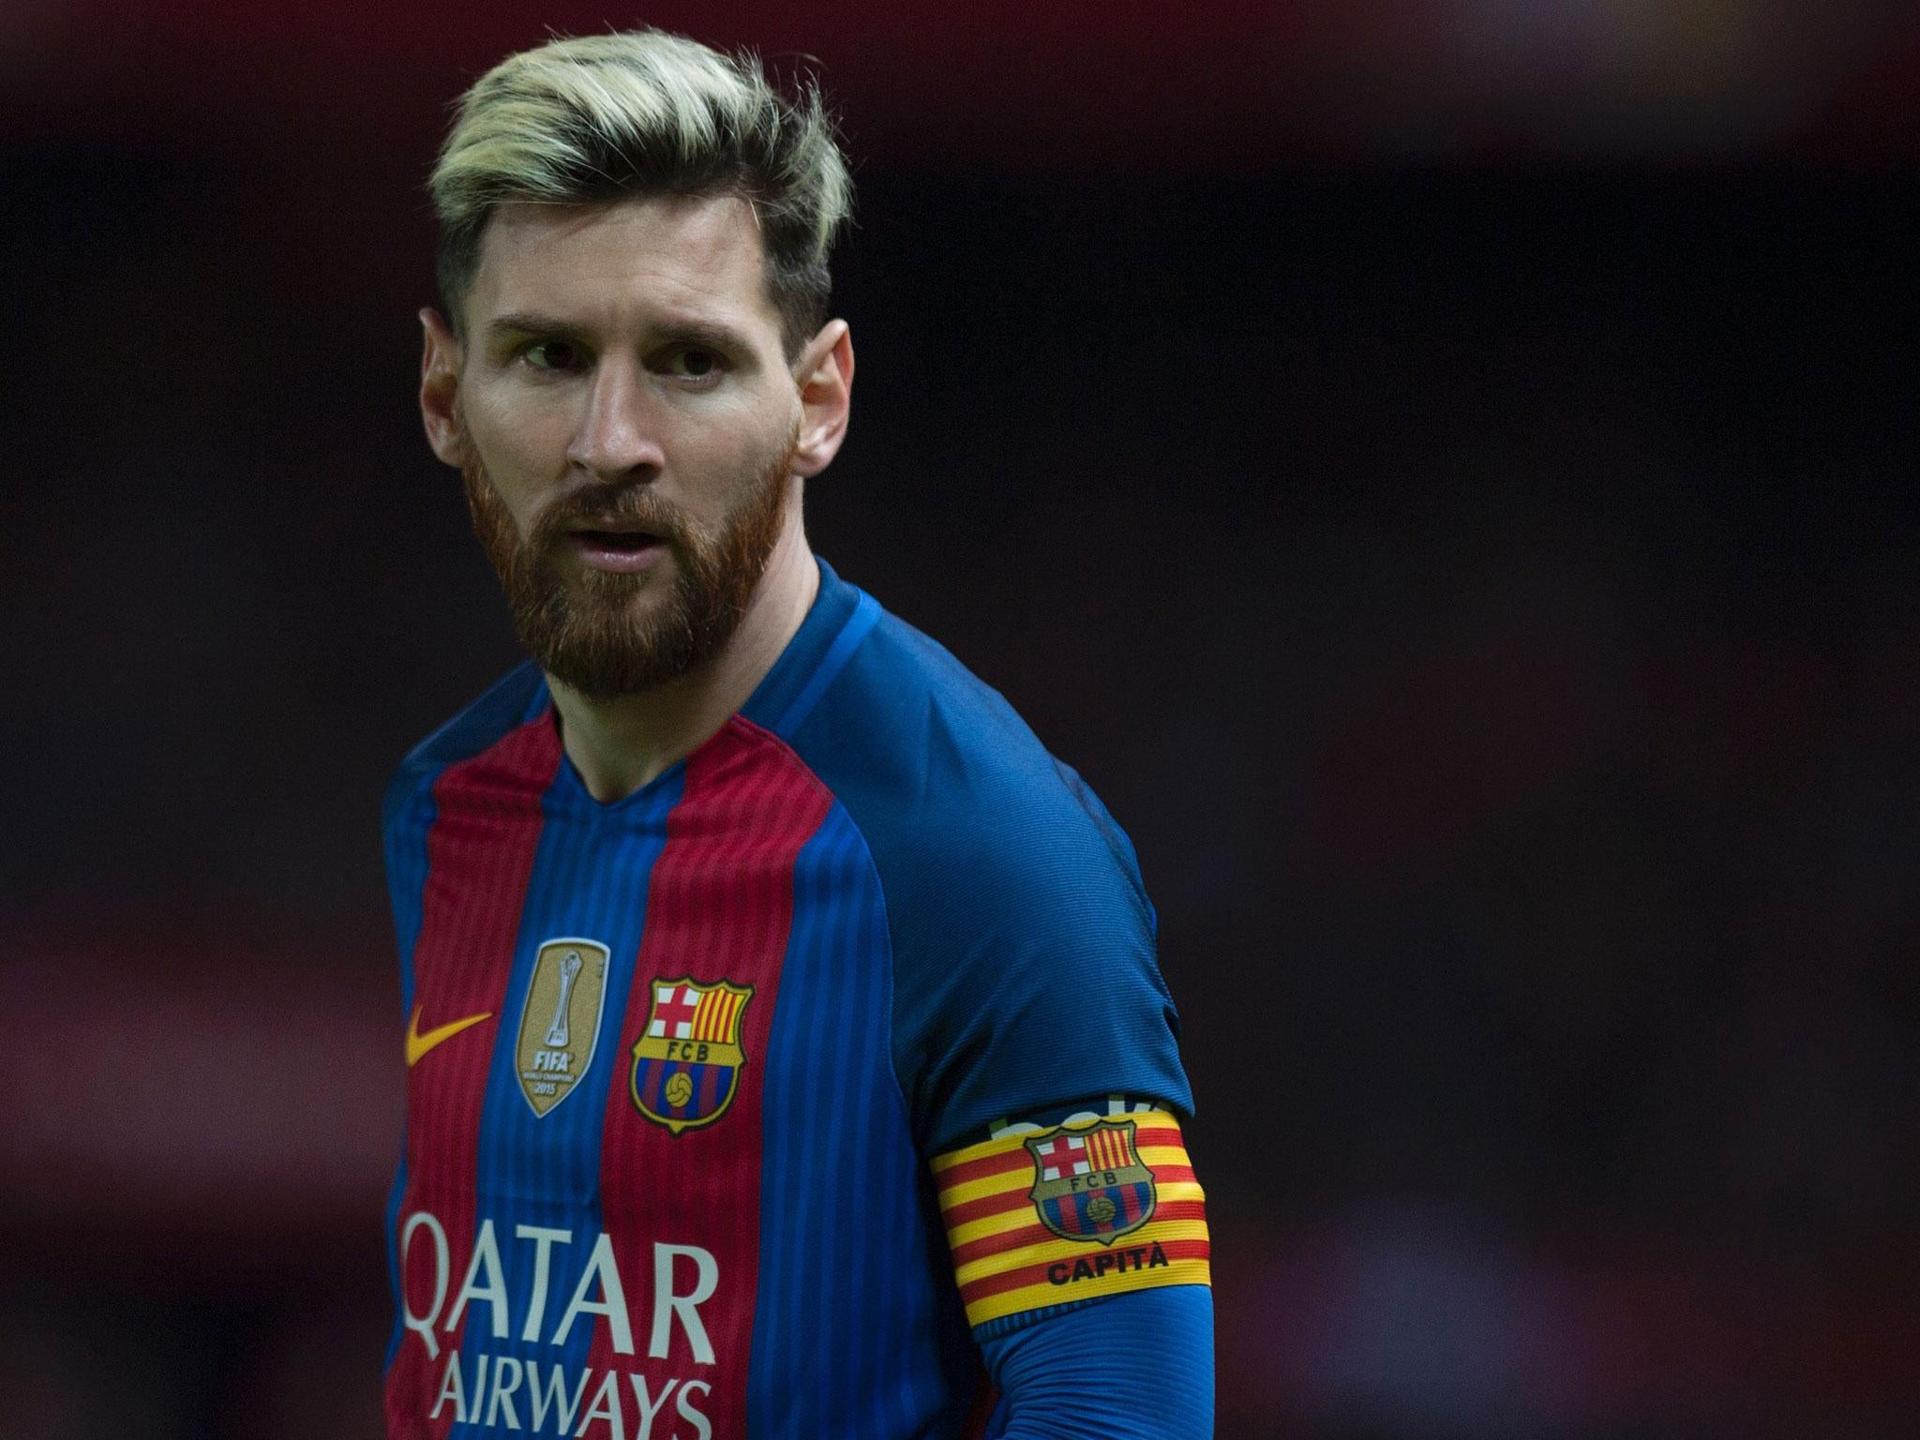 LaLiga insists Messi cannot sign new Barcelona contract